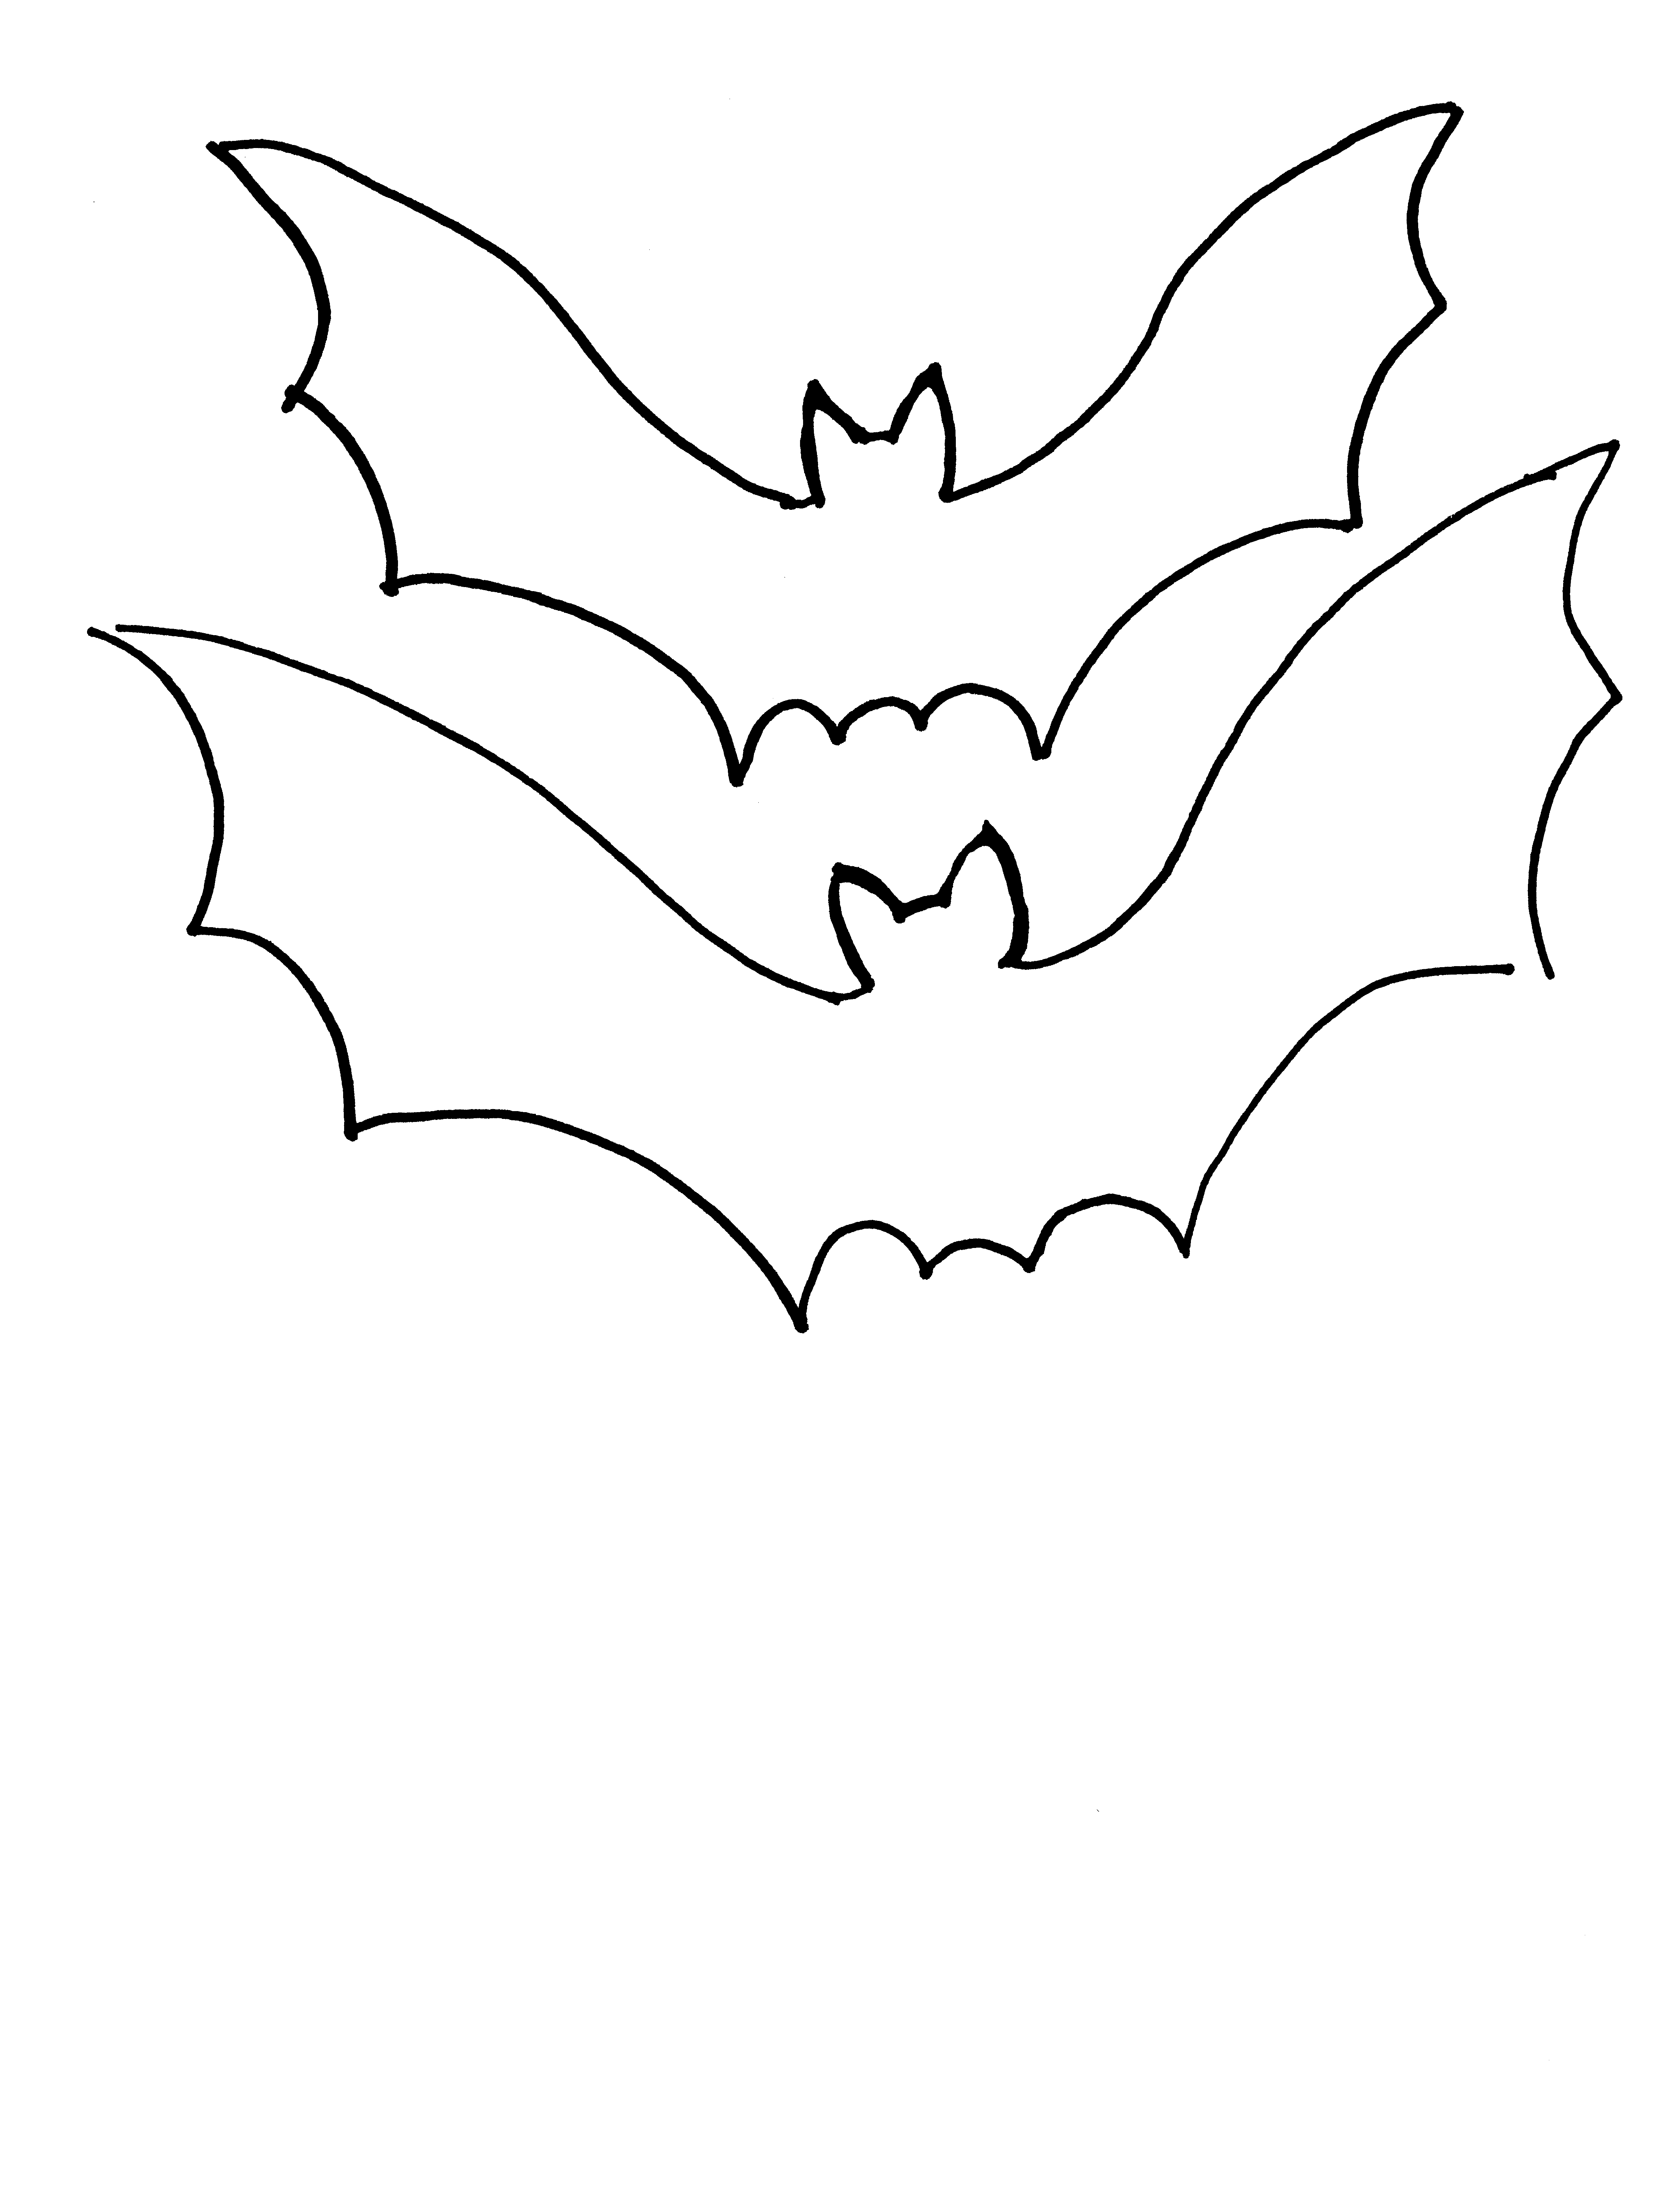 Free Bat Template, Download Free Bat Template png images, Free ClipArts